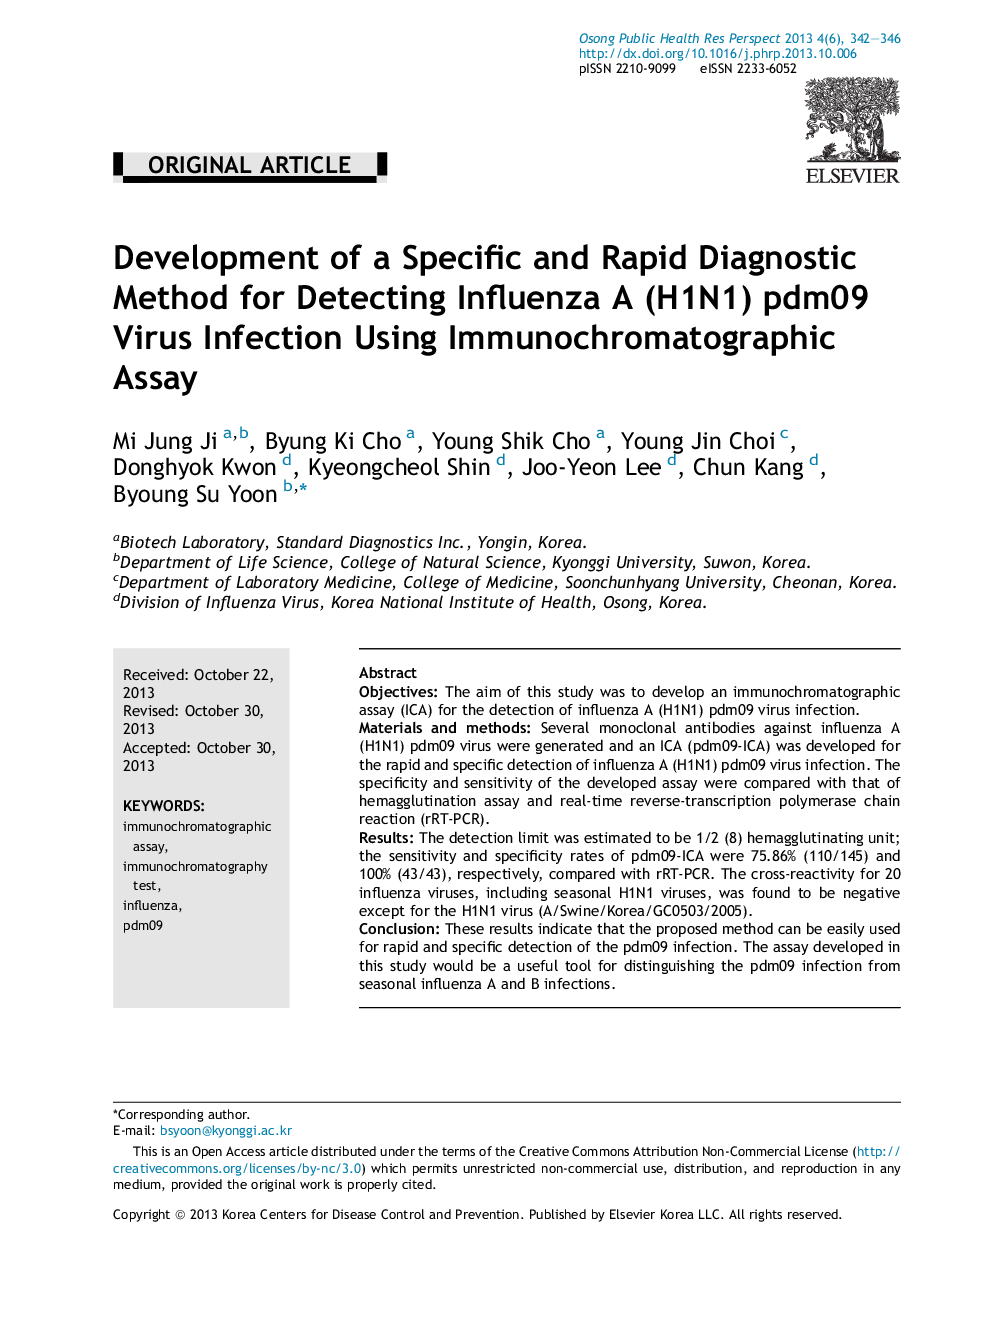 Development of a Specific and Rapid Diagnostic Method for Detecting Influenza A (H1N1) pdm09 Virus Infection Using Immunochromatographic Assay 